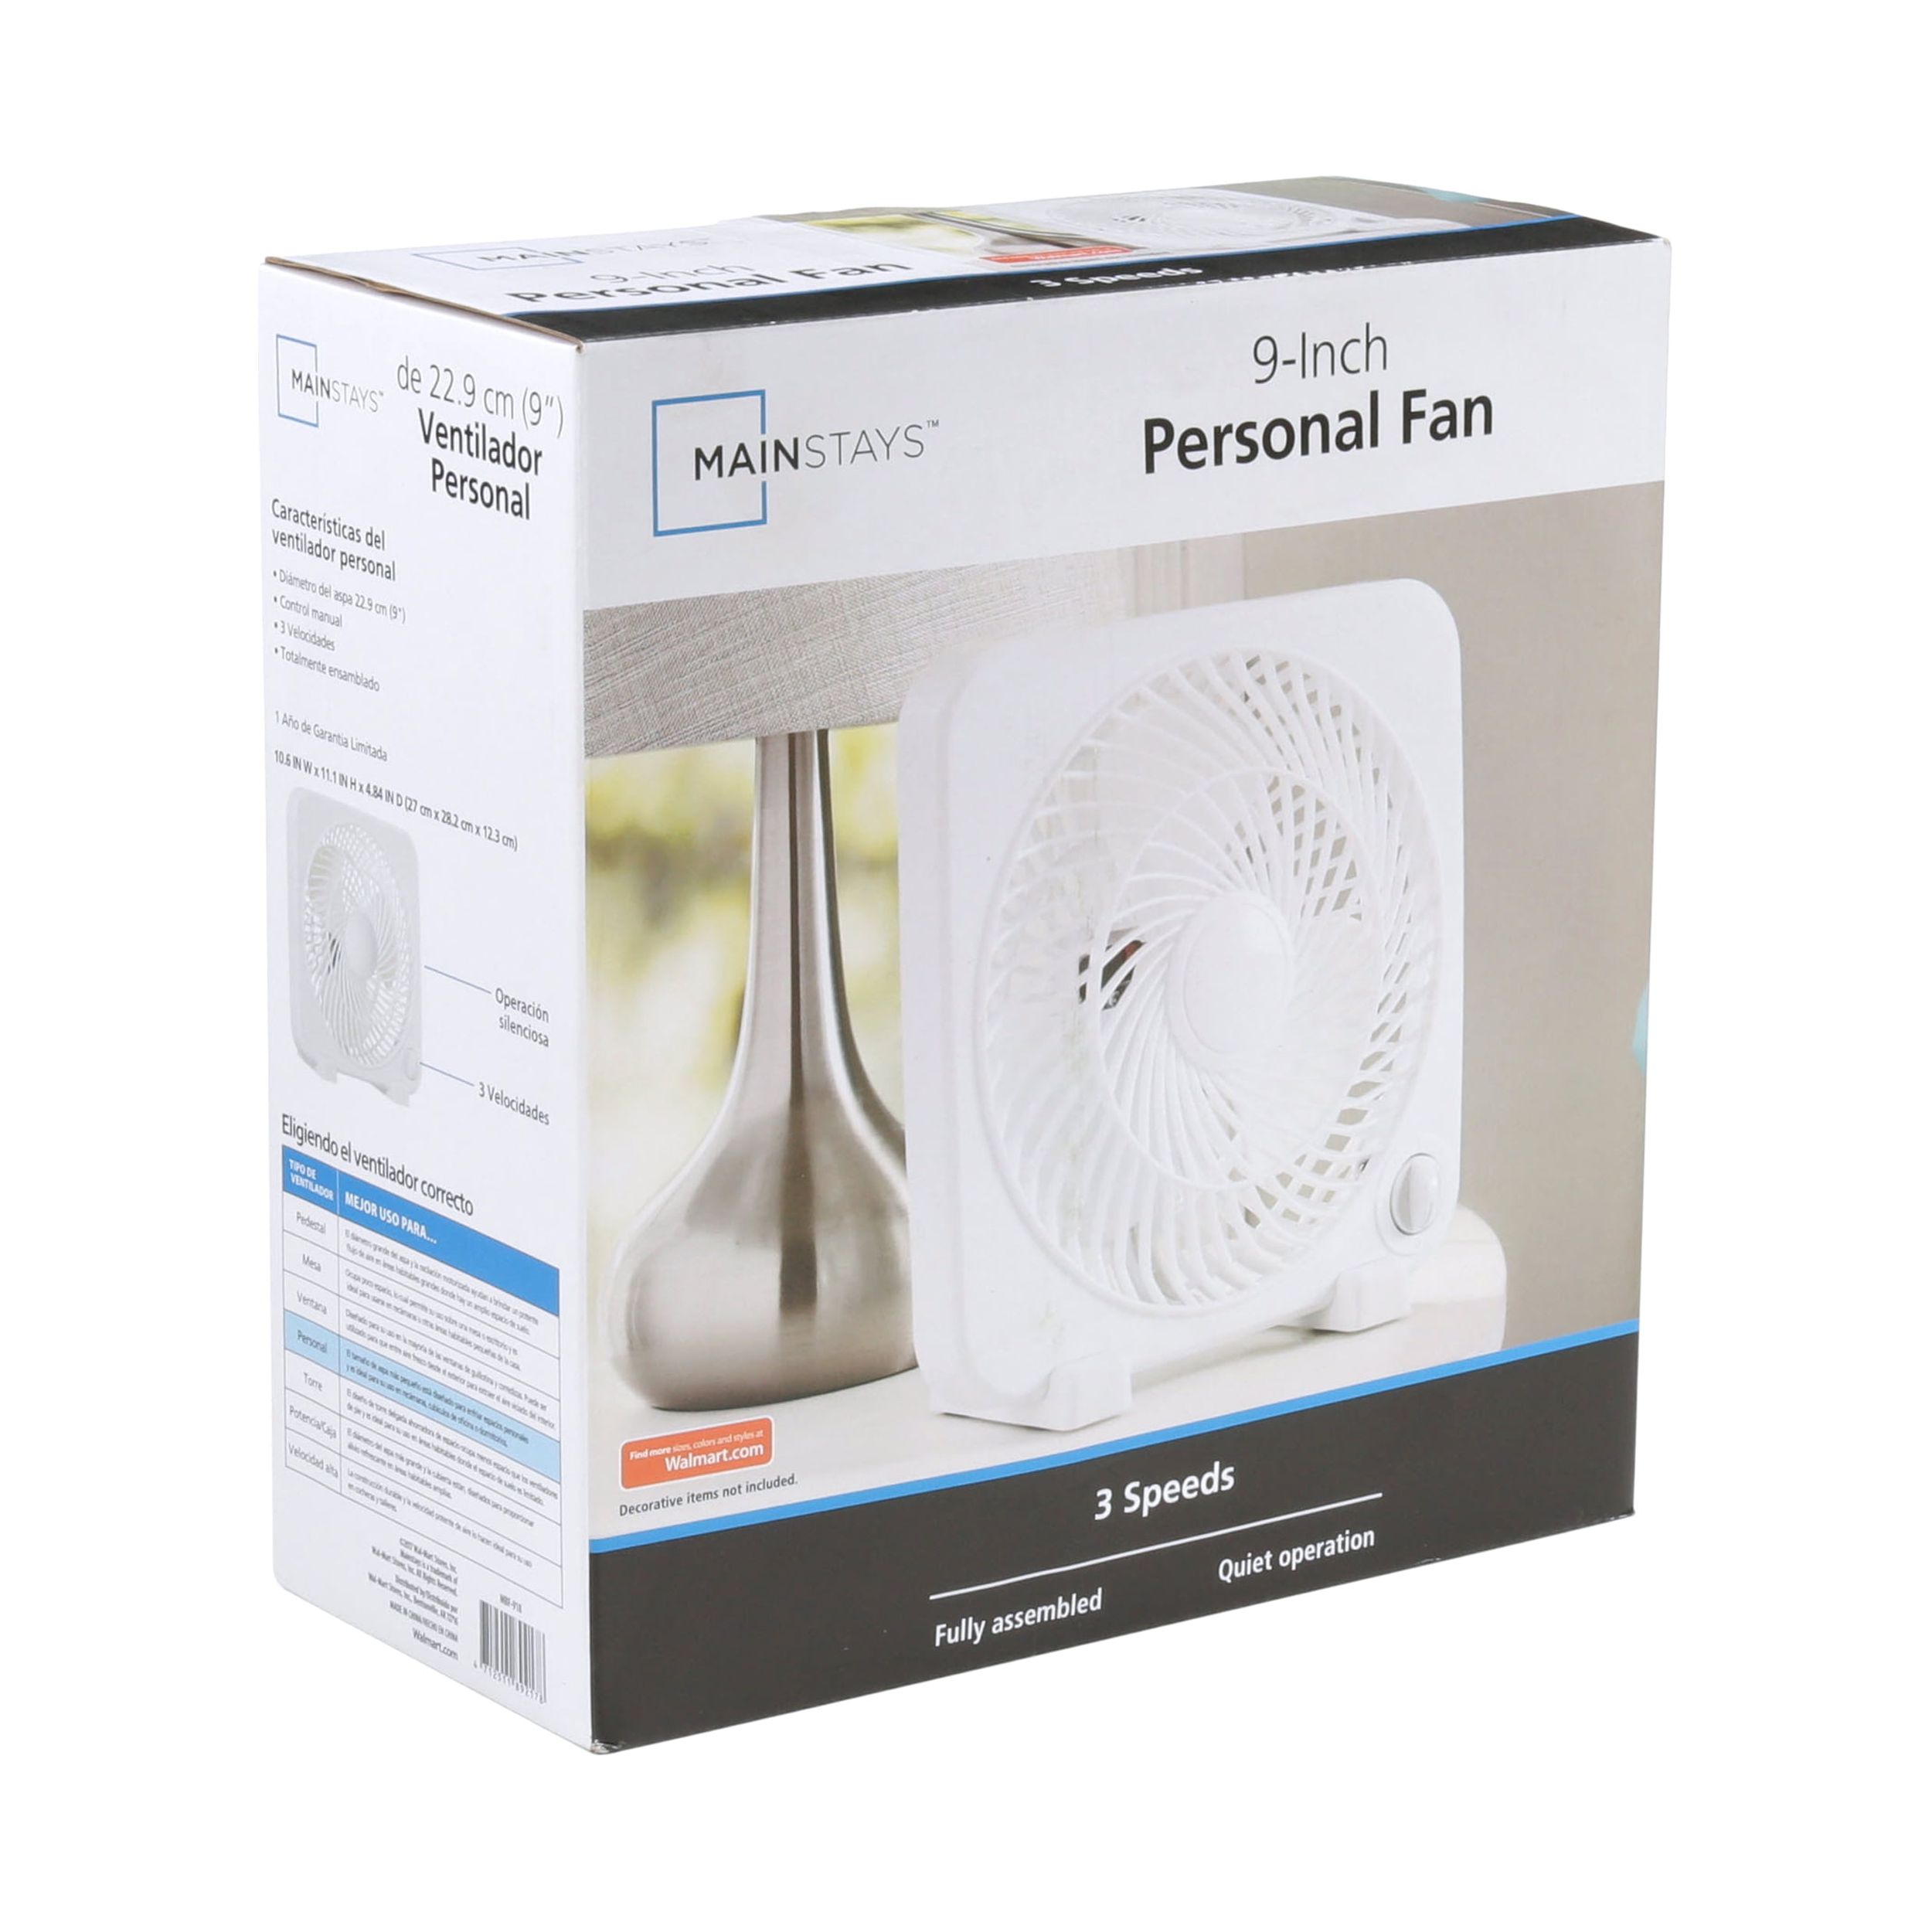 Mainstays 9inch Personal Desktop Fan with 3 Speeds, White - image 5 of 9